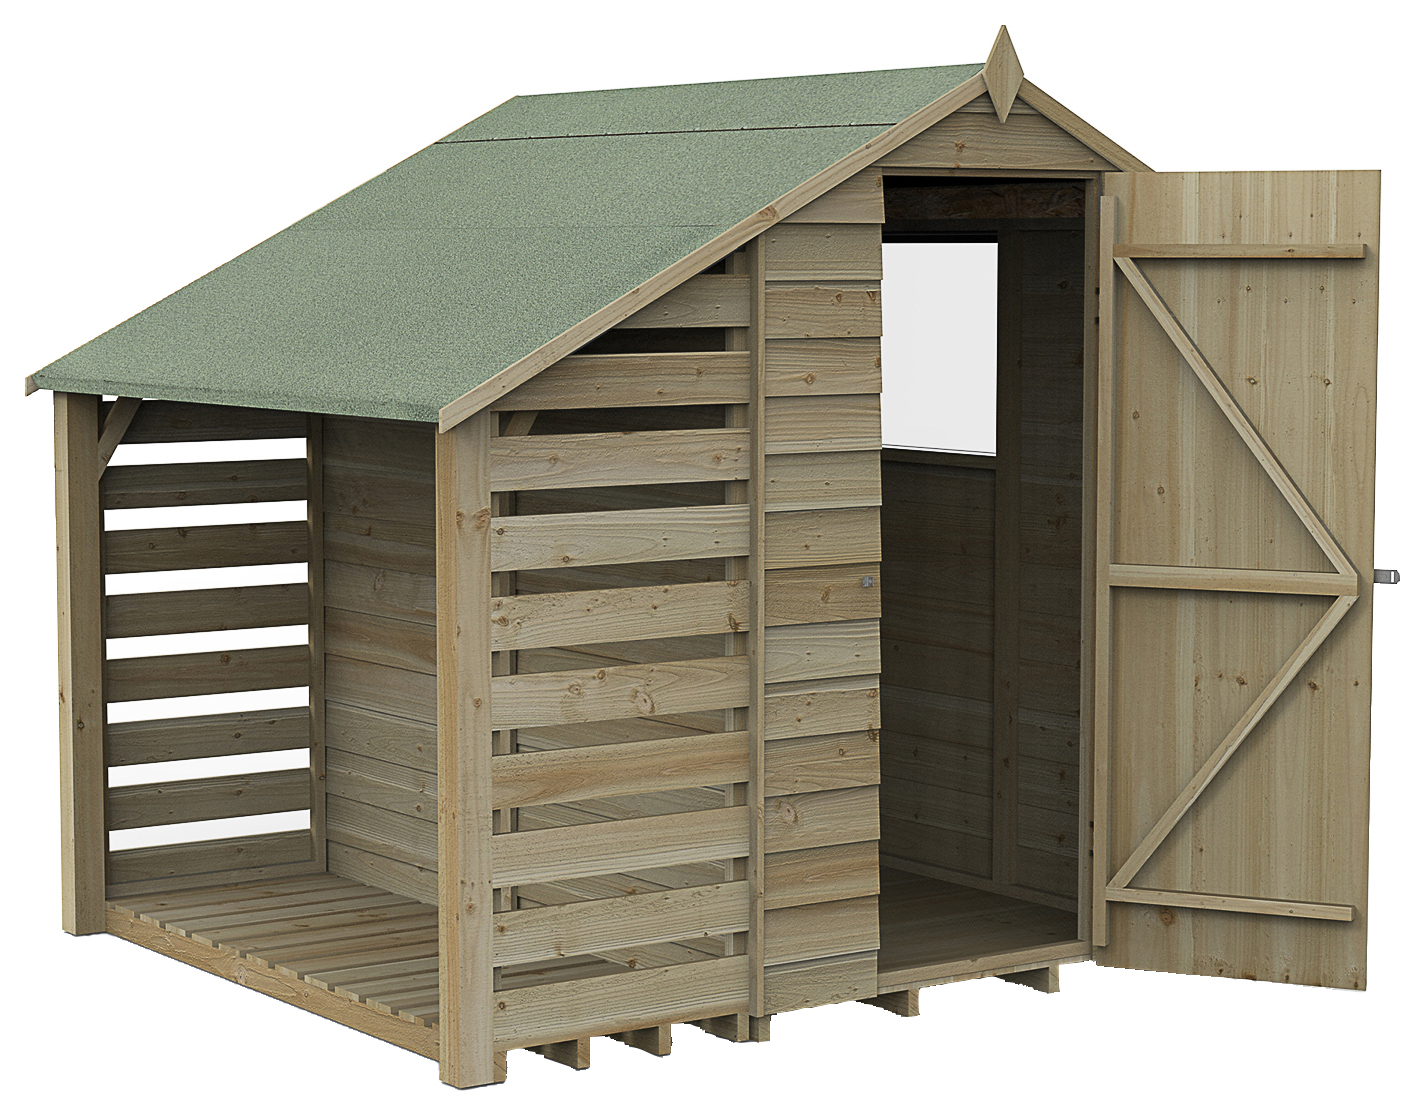 Image of Forest Garden 6 x 4ft 4Life Apex Overlap Pressure Treated Windowless Shed with Lean-To and Assembly